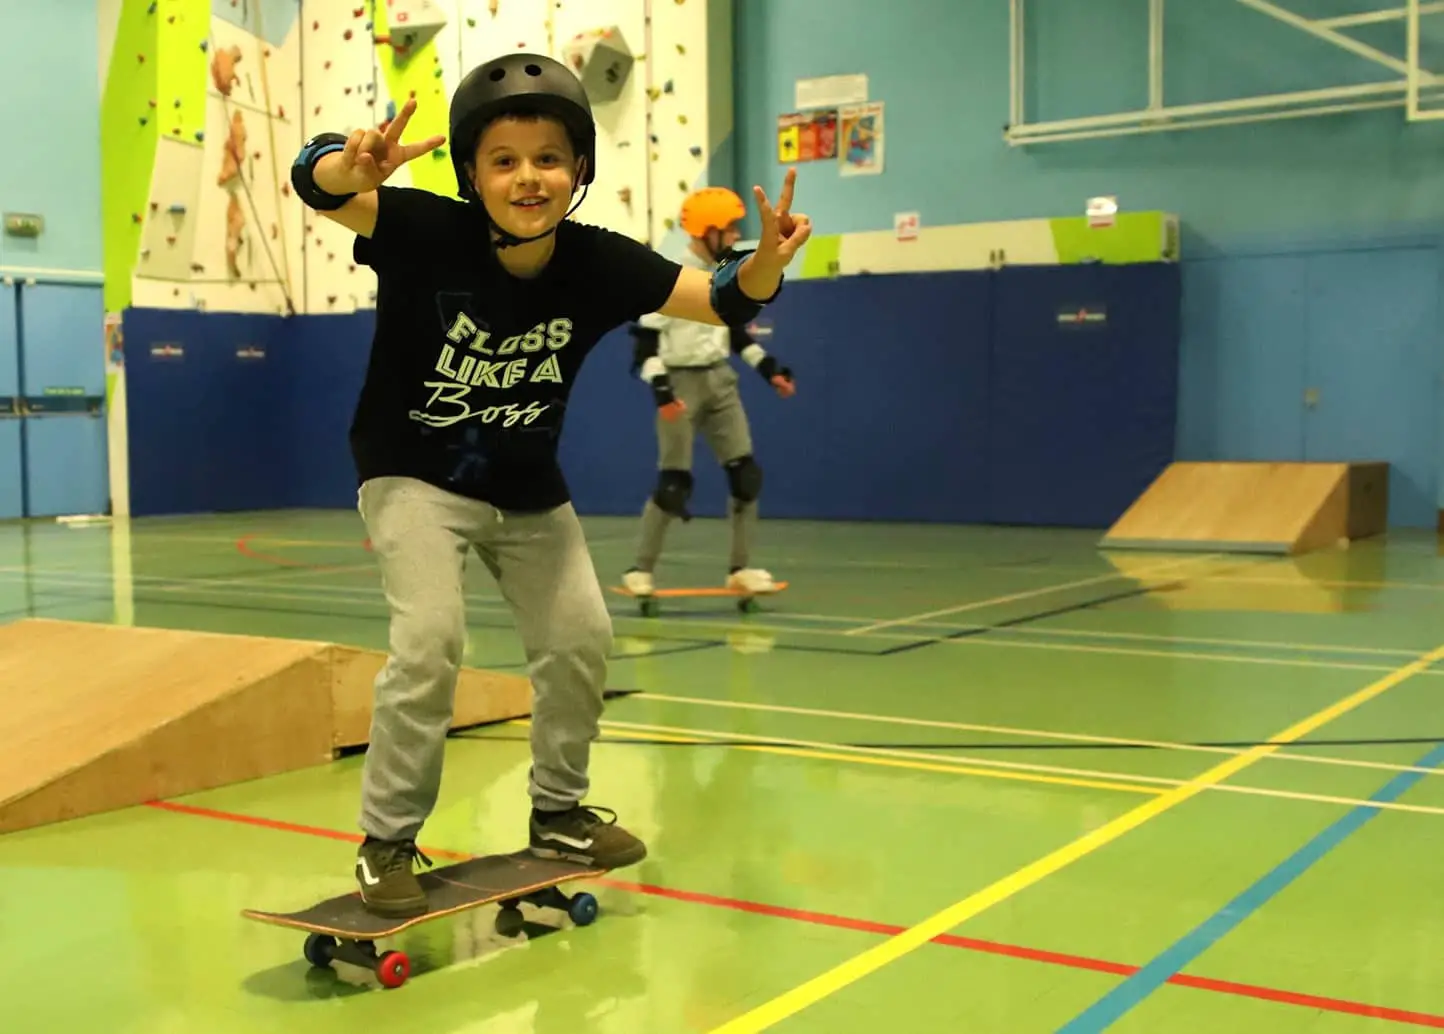 john cattles skate club with lad on skateboard indicating Victory signs with both hands